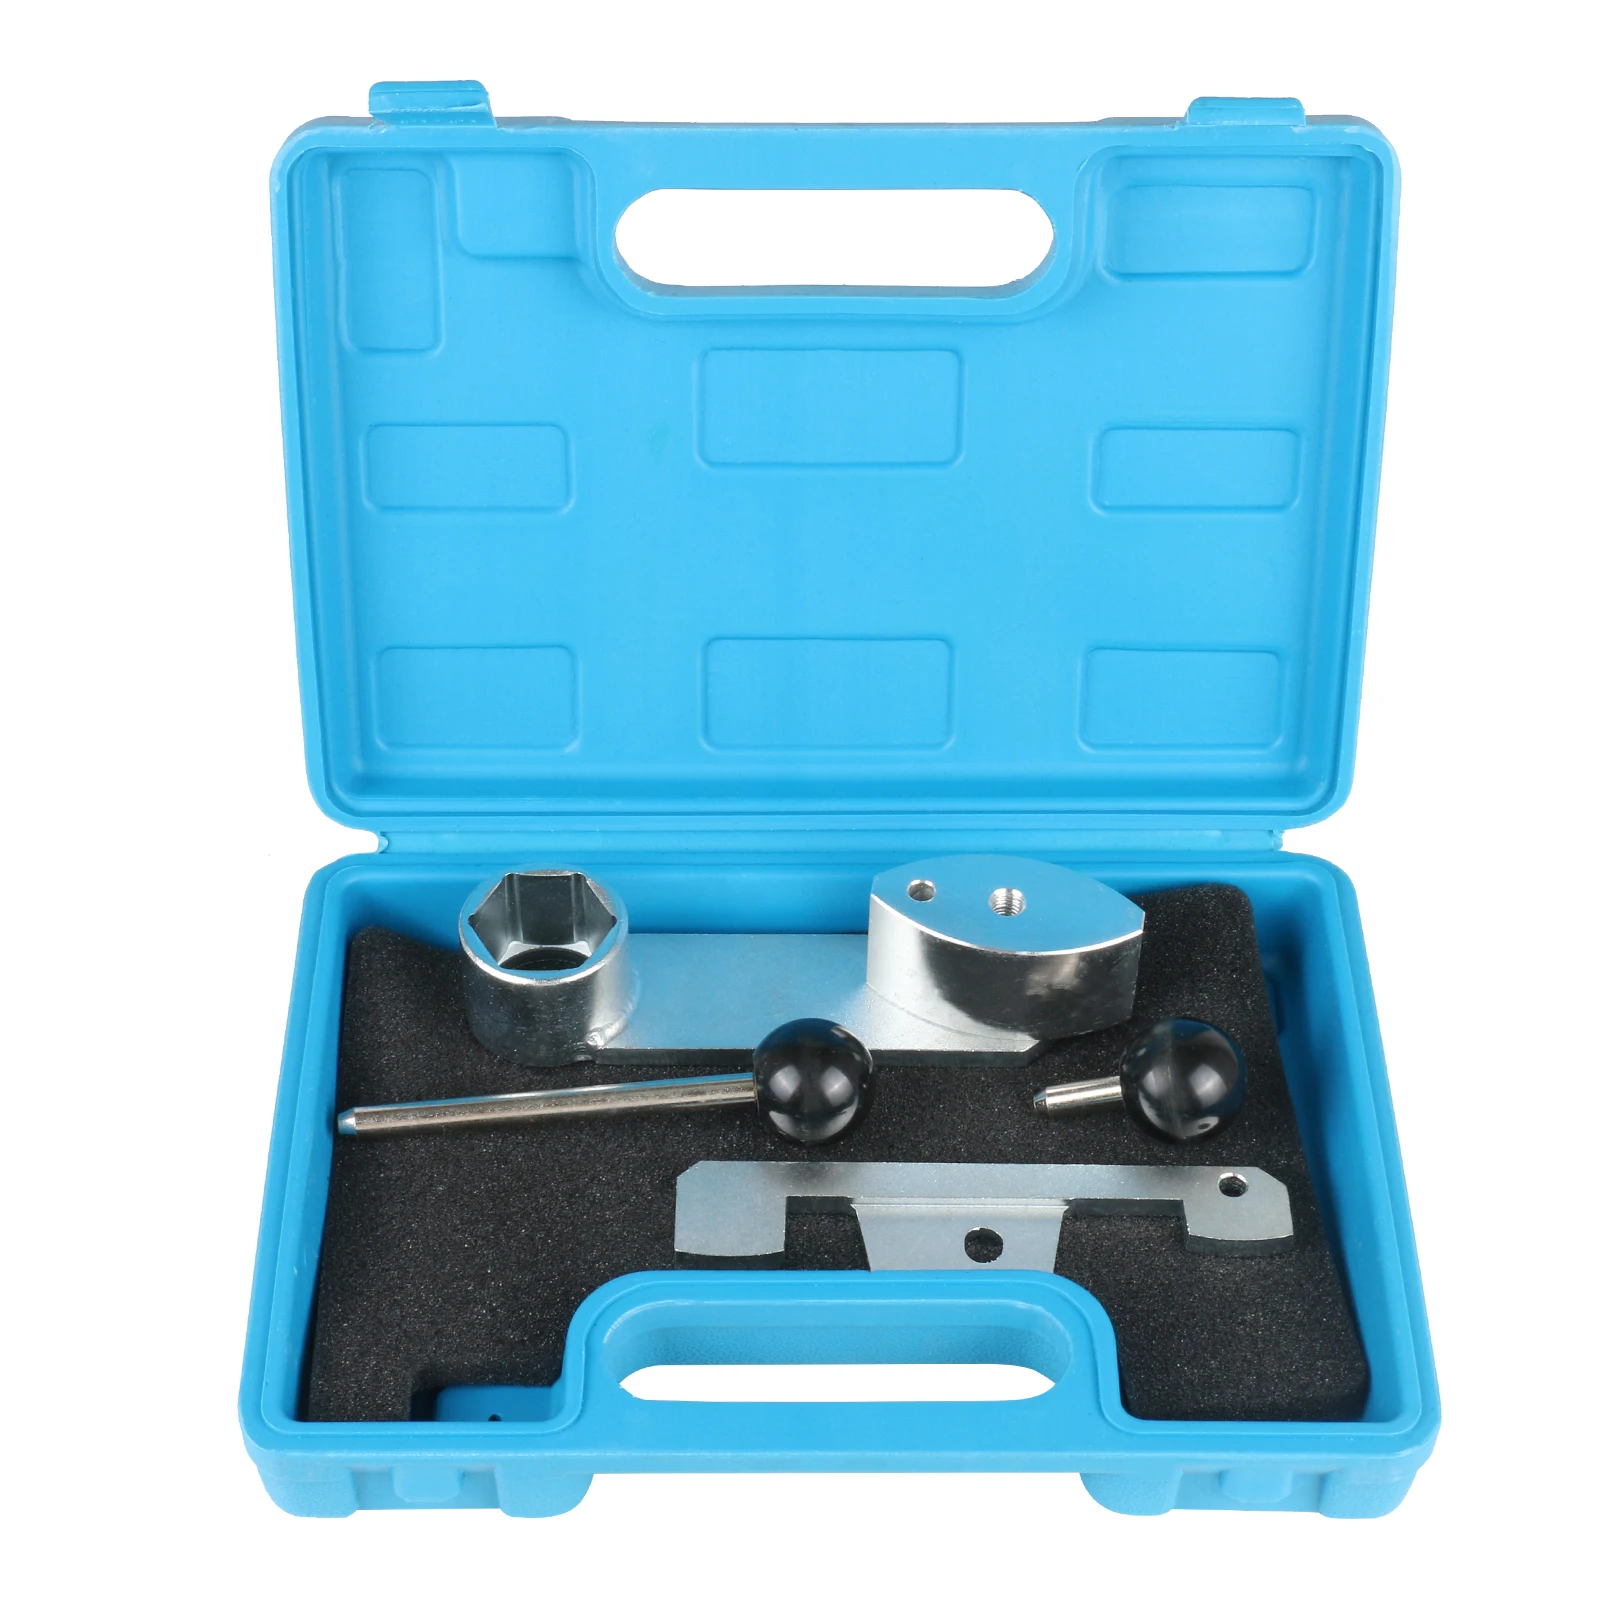 

Camshaft Engine Timing Tool Set FITS For Porsche 911 996 997 Cayman 986 987 2.7 3.2 3.4 Alignment Integral Distribut Tools